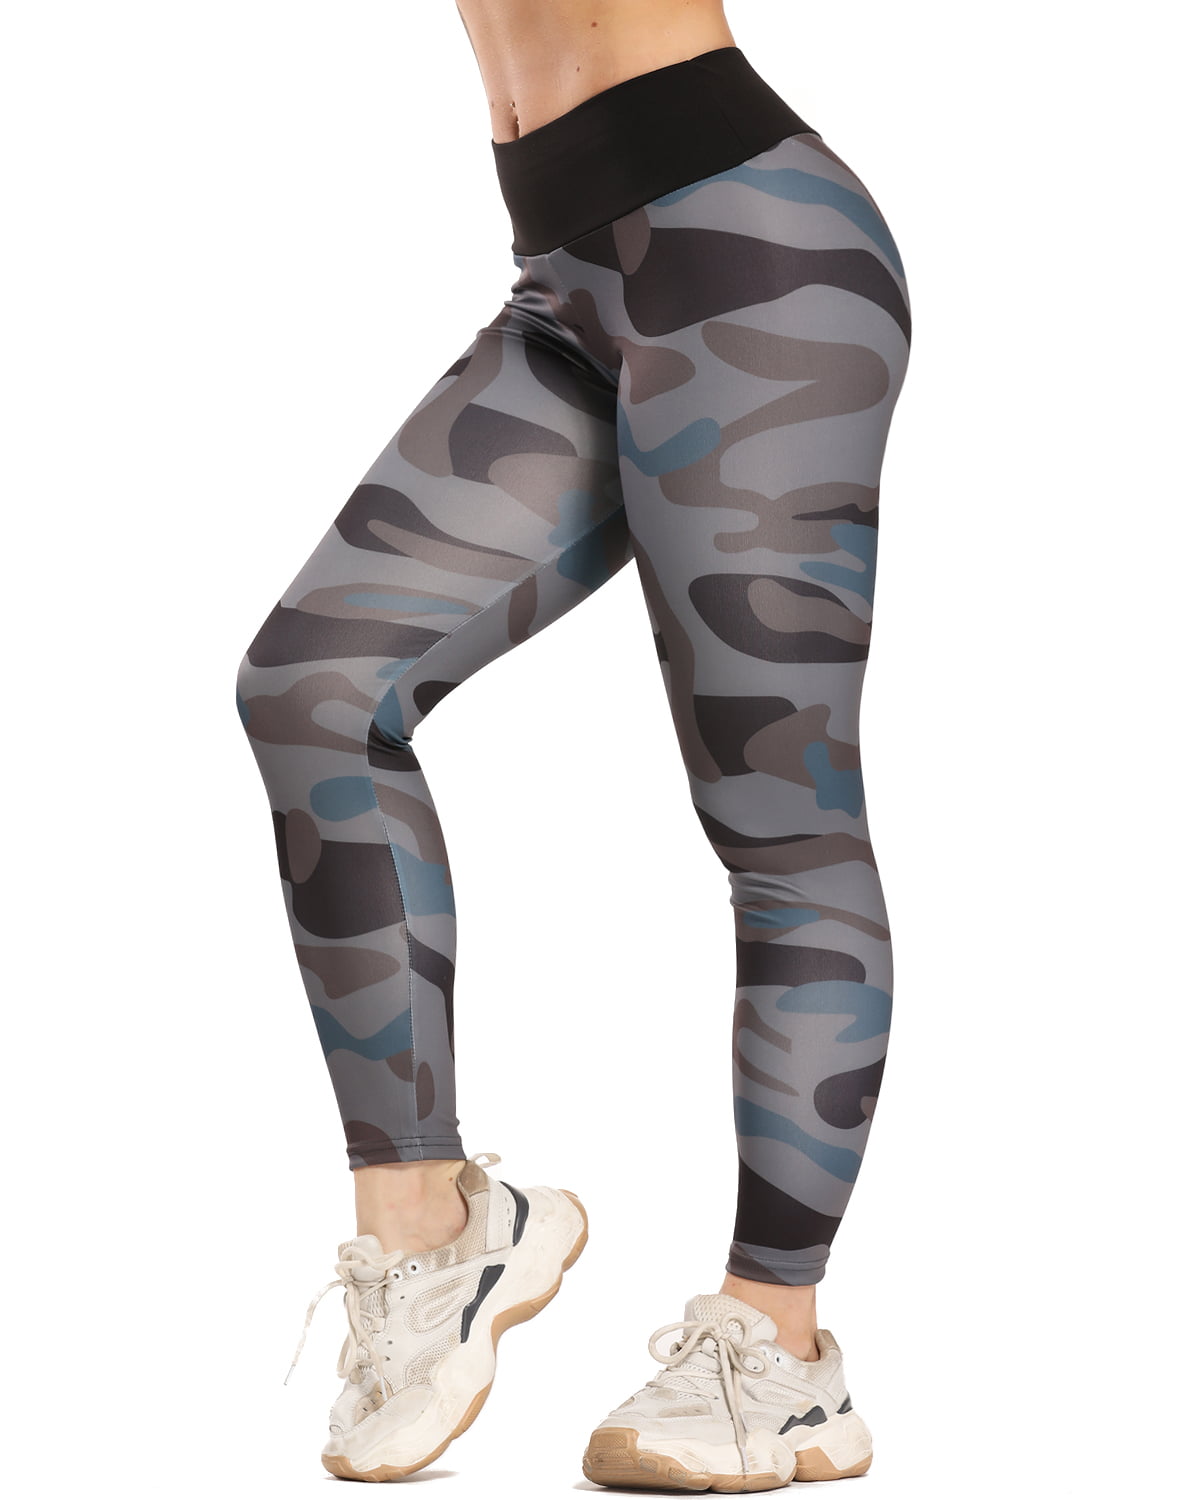 Leggings for Womens High Waist,Camouflage Print Hip Lift Tummy Control Exercise Fitness Running Stretch Yoga Pants 